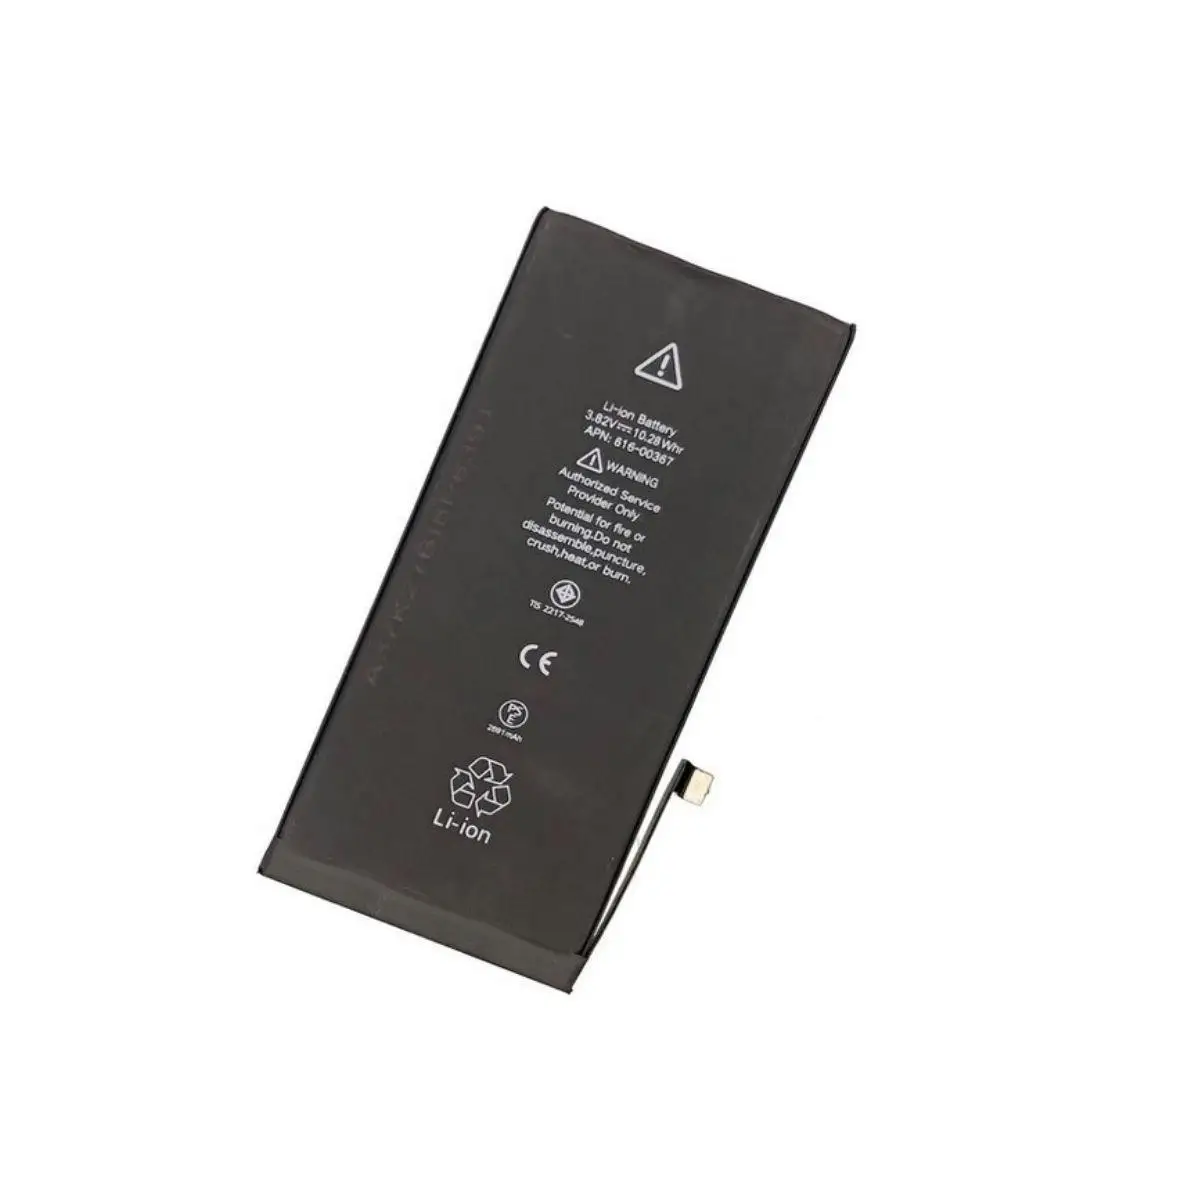 

Internal neutral replacement battery model 616-00367 for Iphone 8 Plus